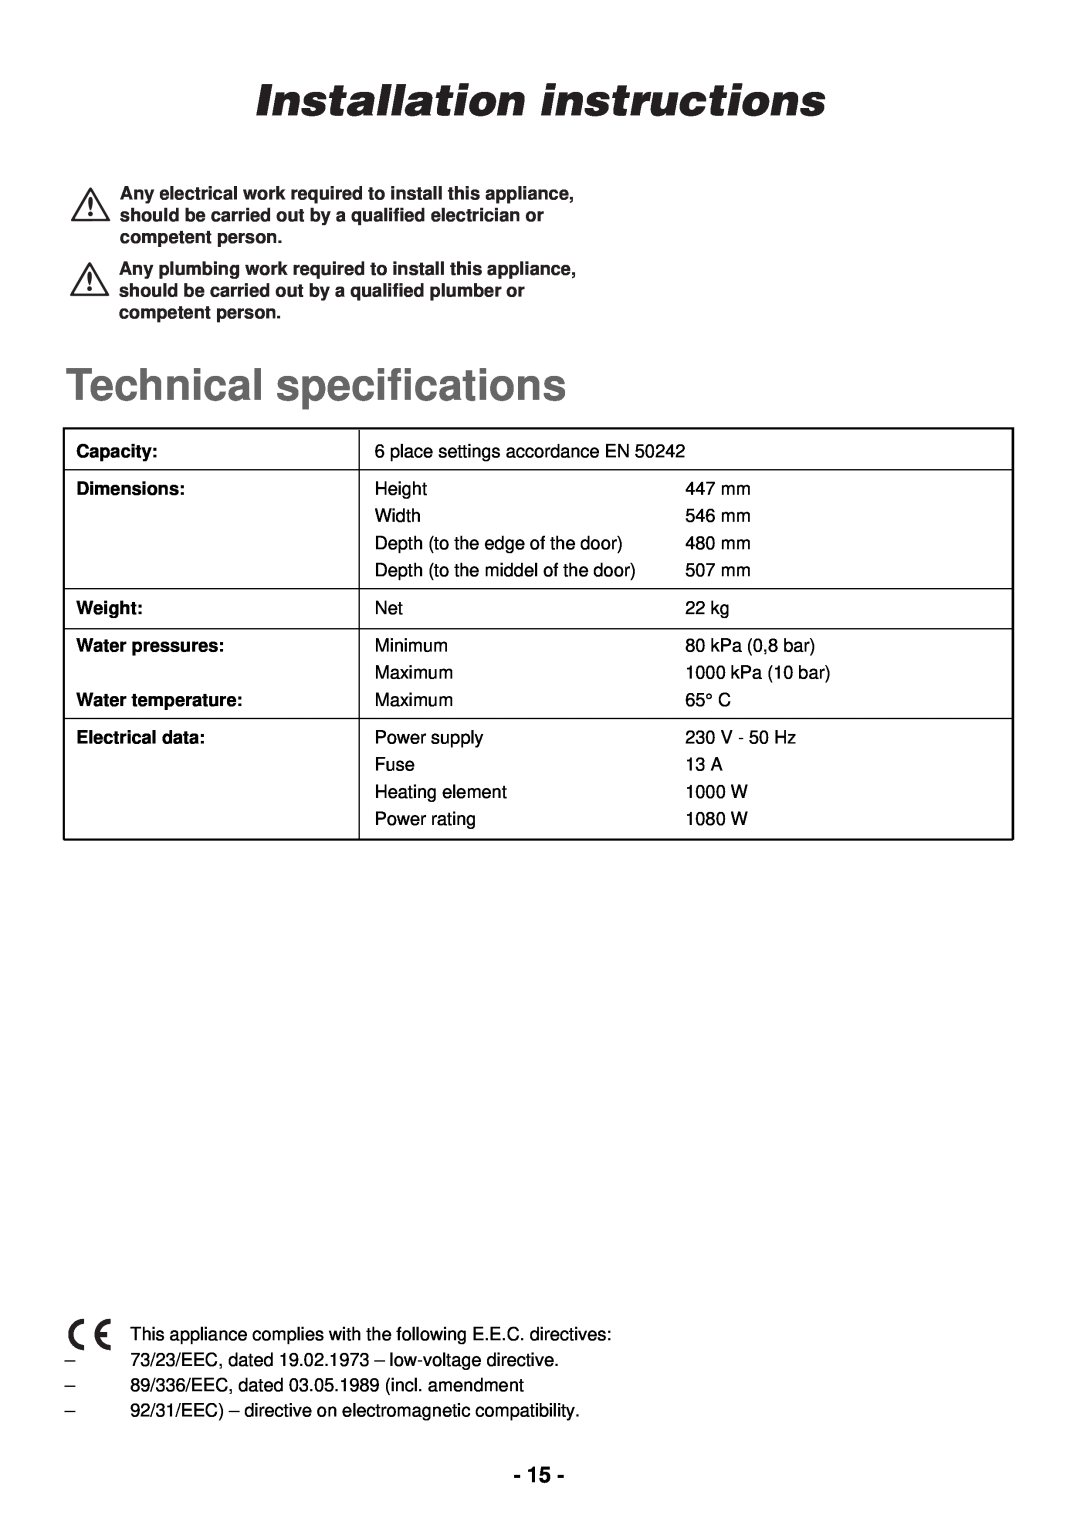 Zanussi DCE 5655 manual Installation instructions, Technical speciﬁcations 